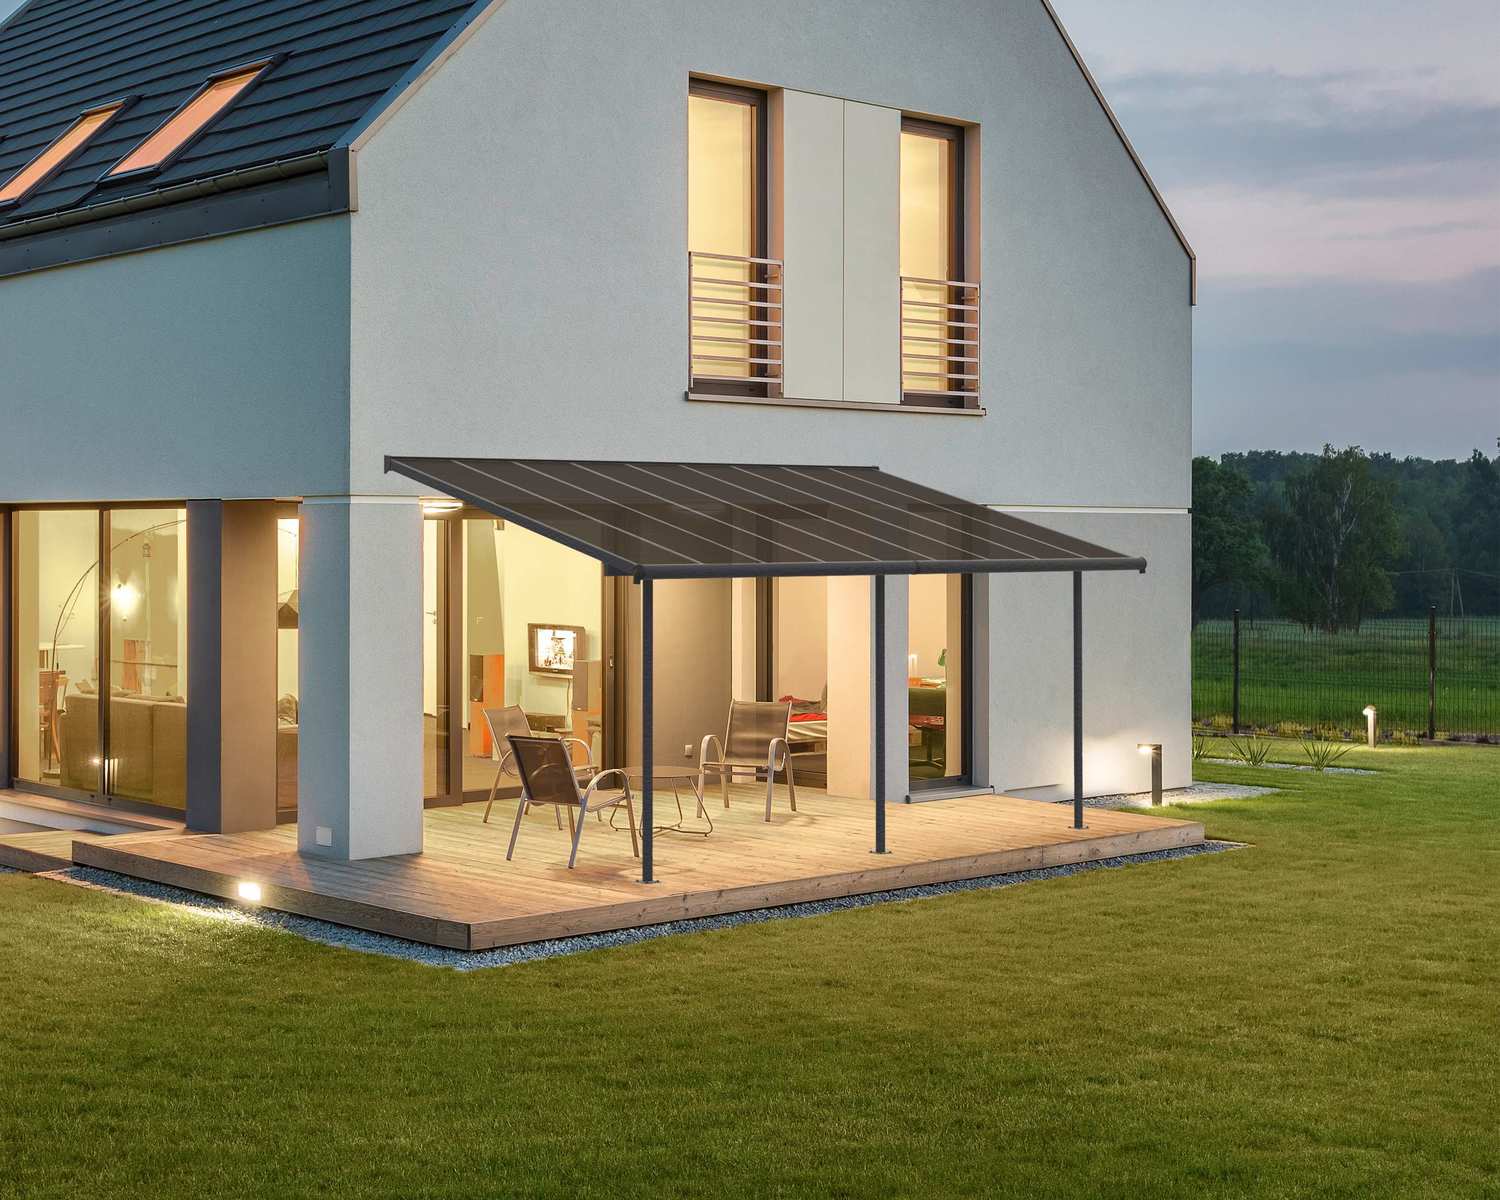 Capri 10 ft. x 18 ft. Grey Aluminium Patio Cover with 3 Posts Attached to House that Covers Patio Outdoor Furniture.